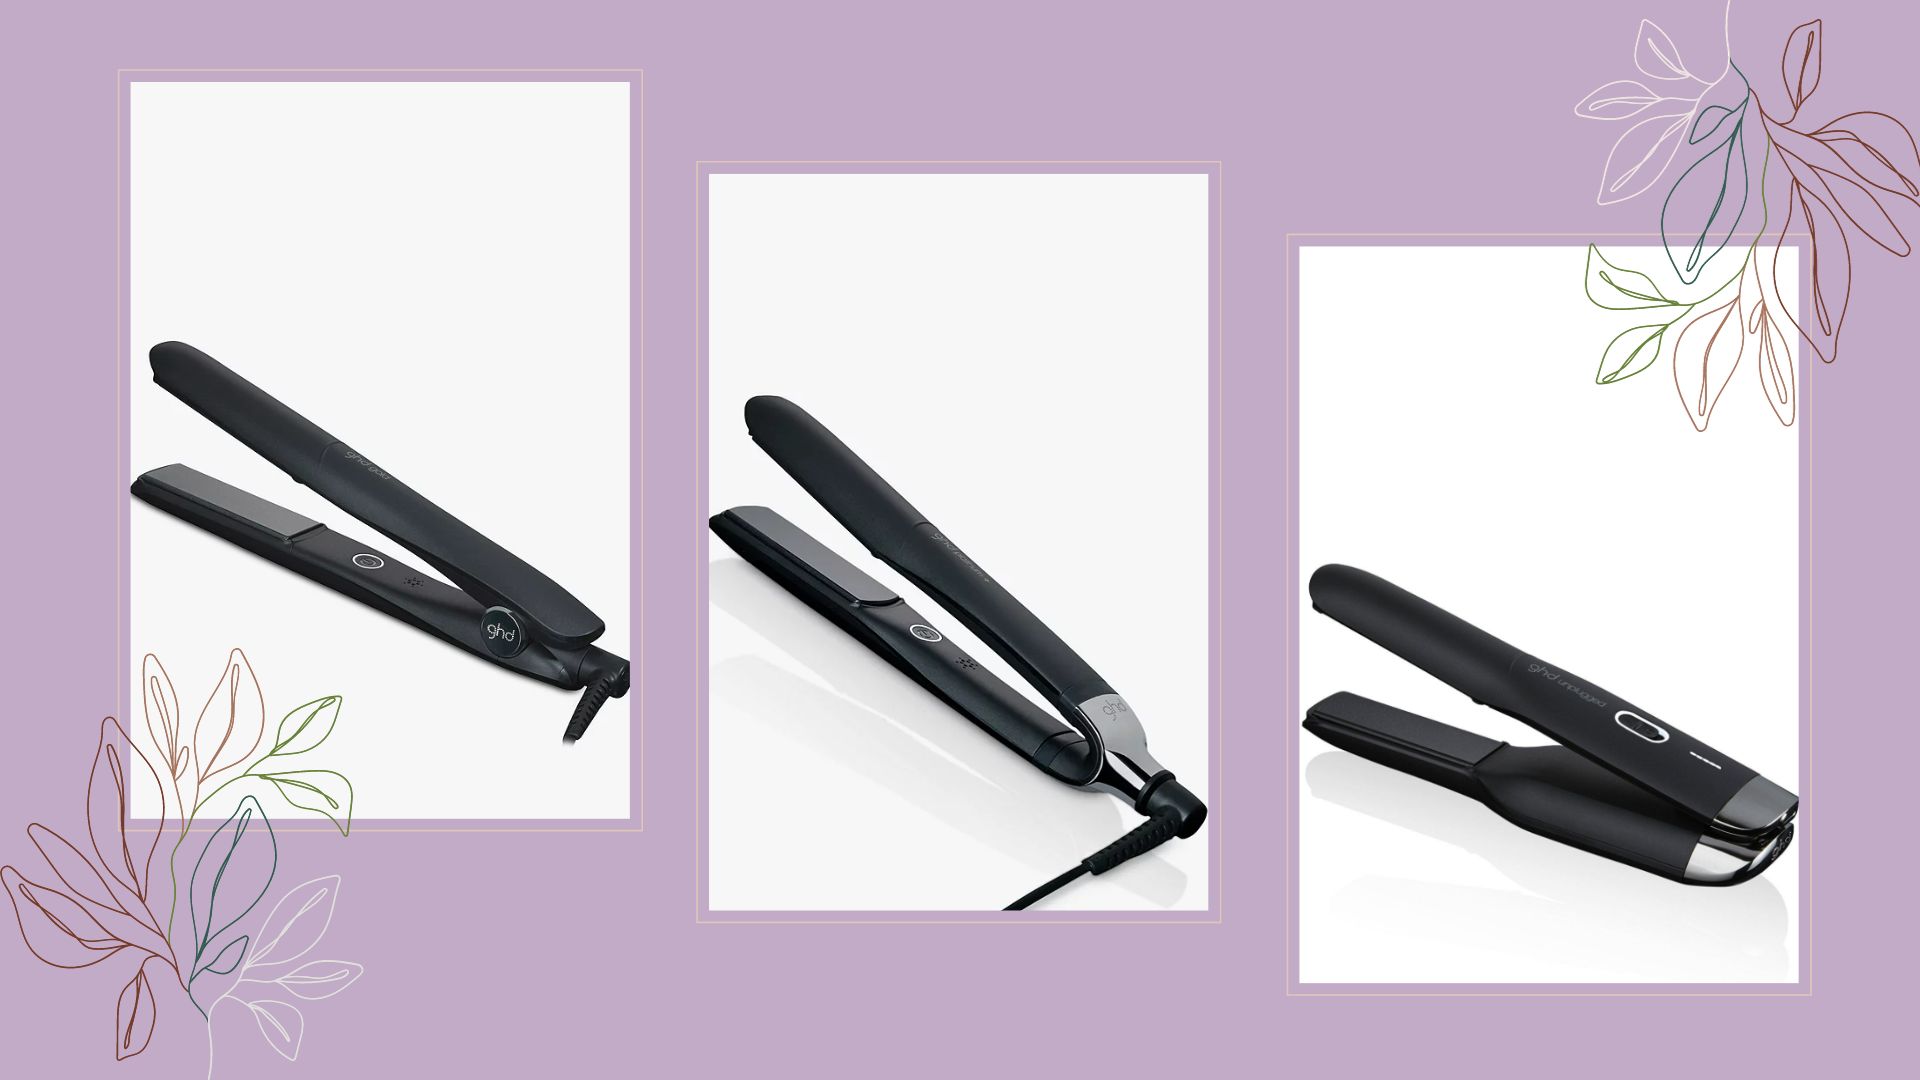 GHD Platinum Plus Flat Iron Review: The Healthiest Choice for Your